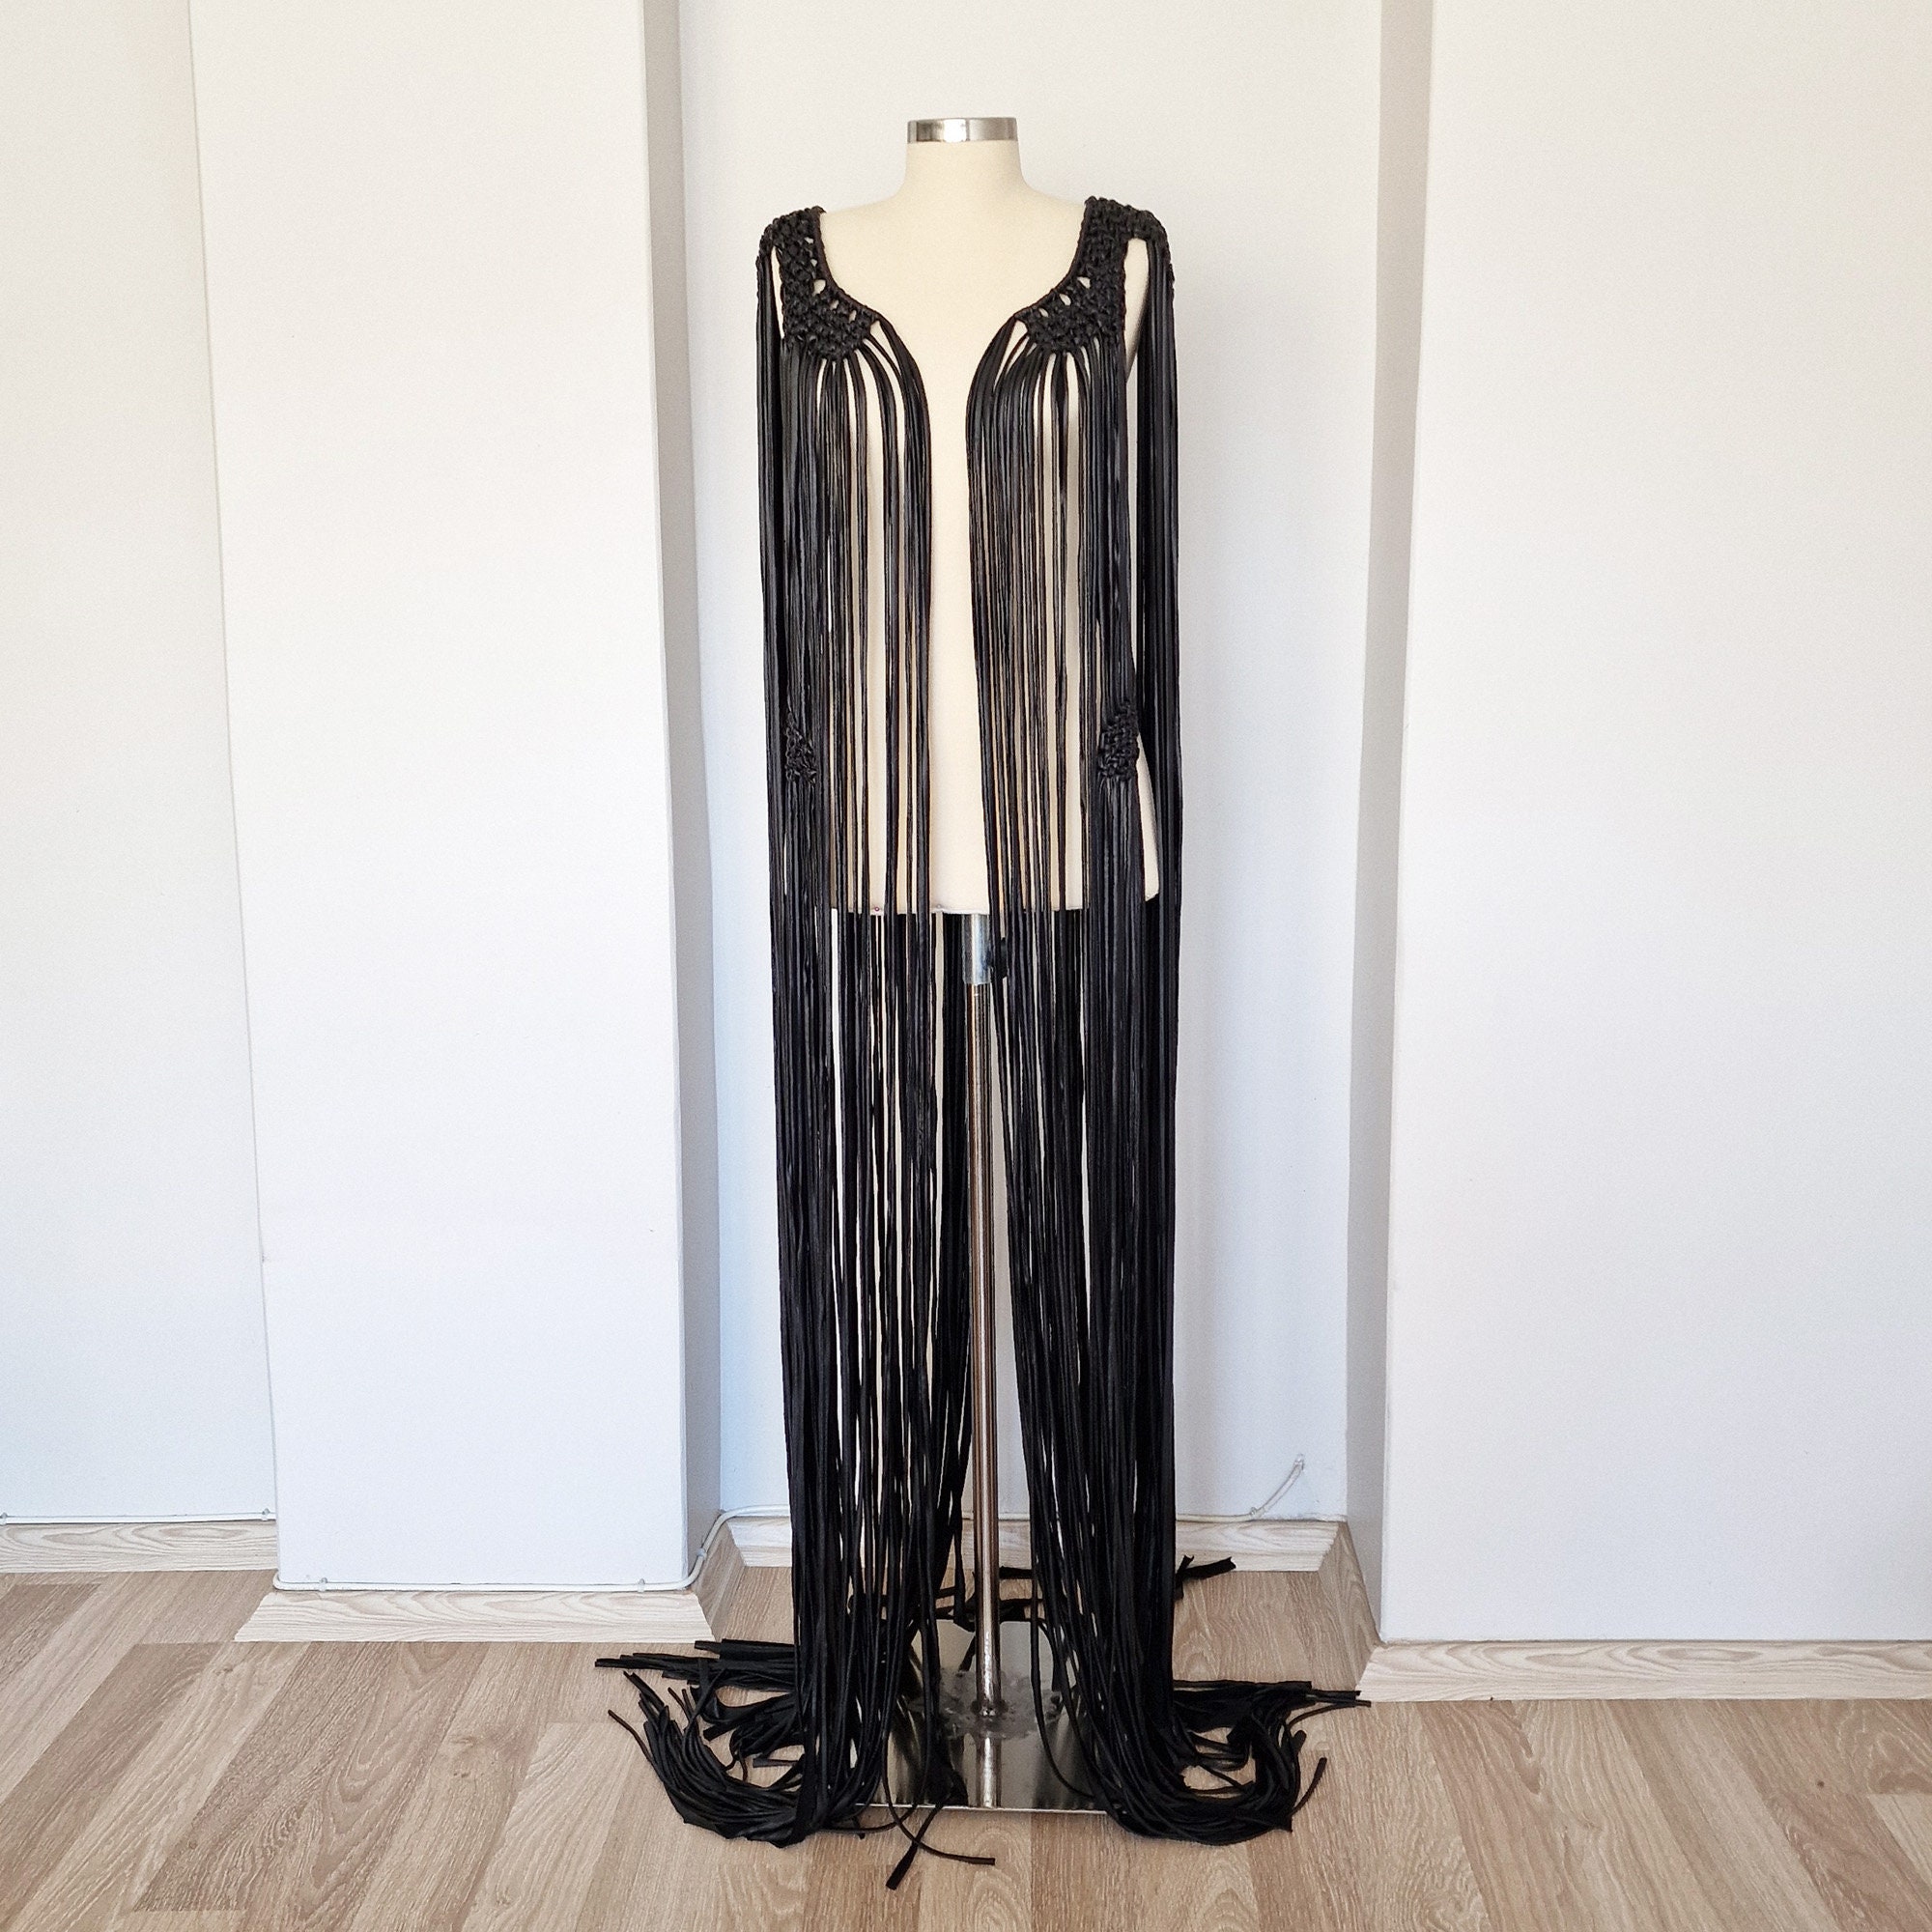 Hera Macrame cape vest with long tassels and epaulettes, Festival clothing, Party Wear, For women, For men, Unisex festival accessoriesthumbnail